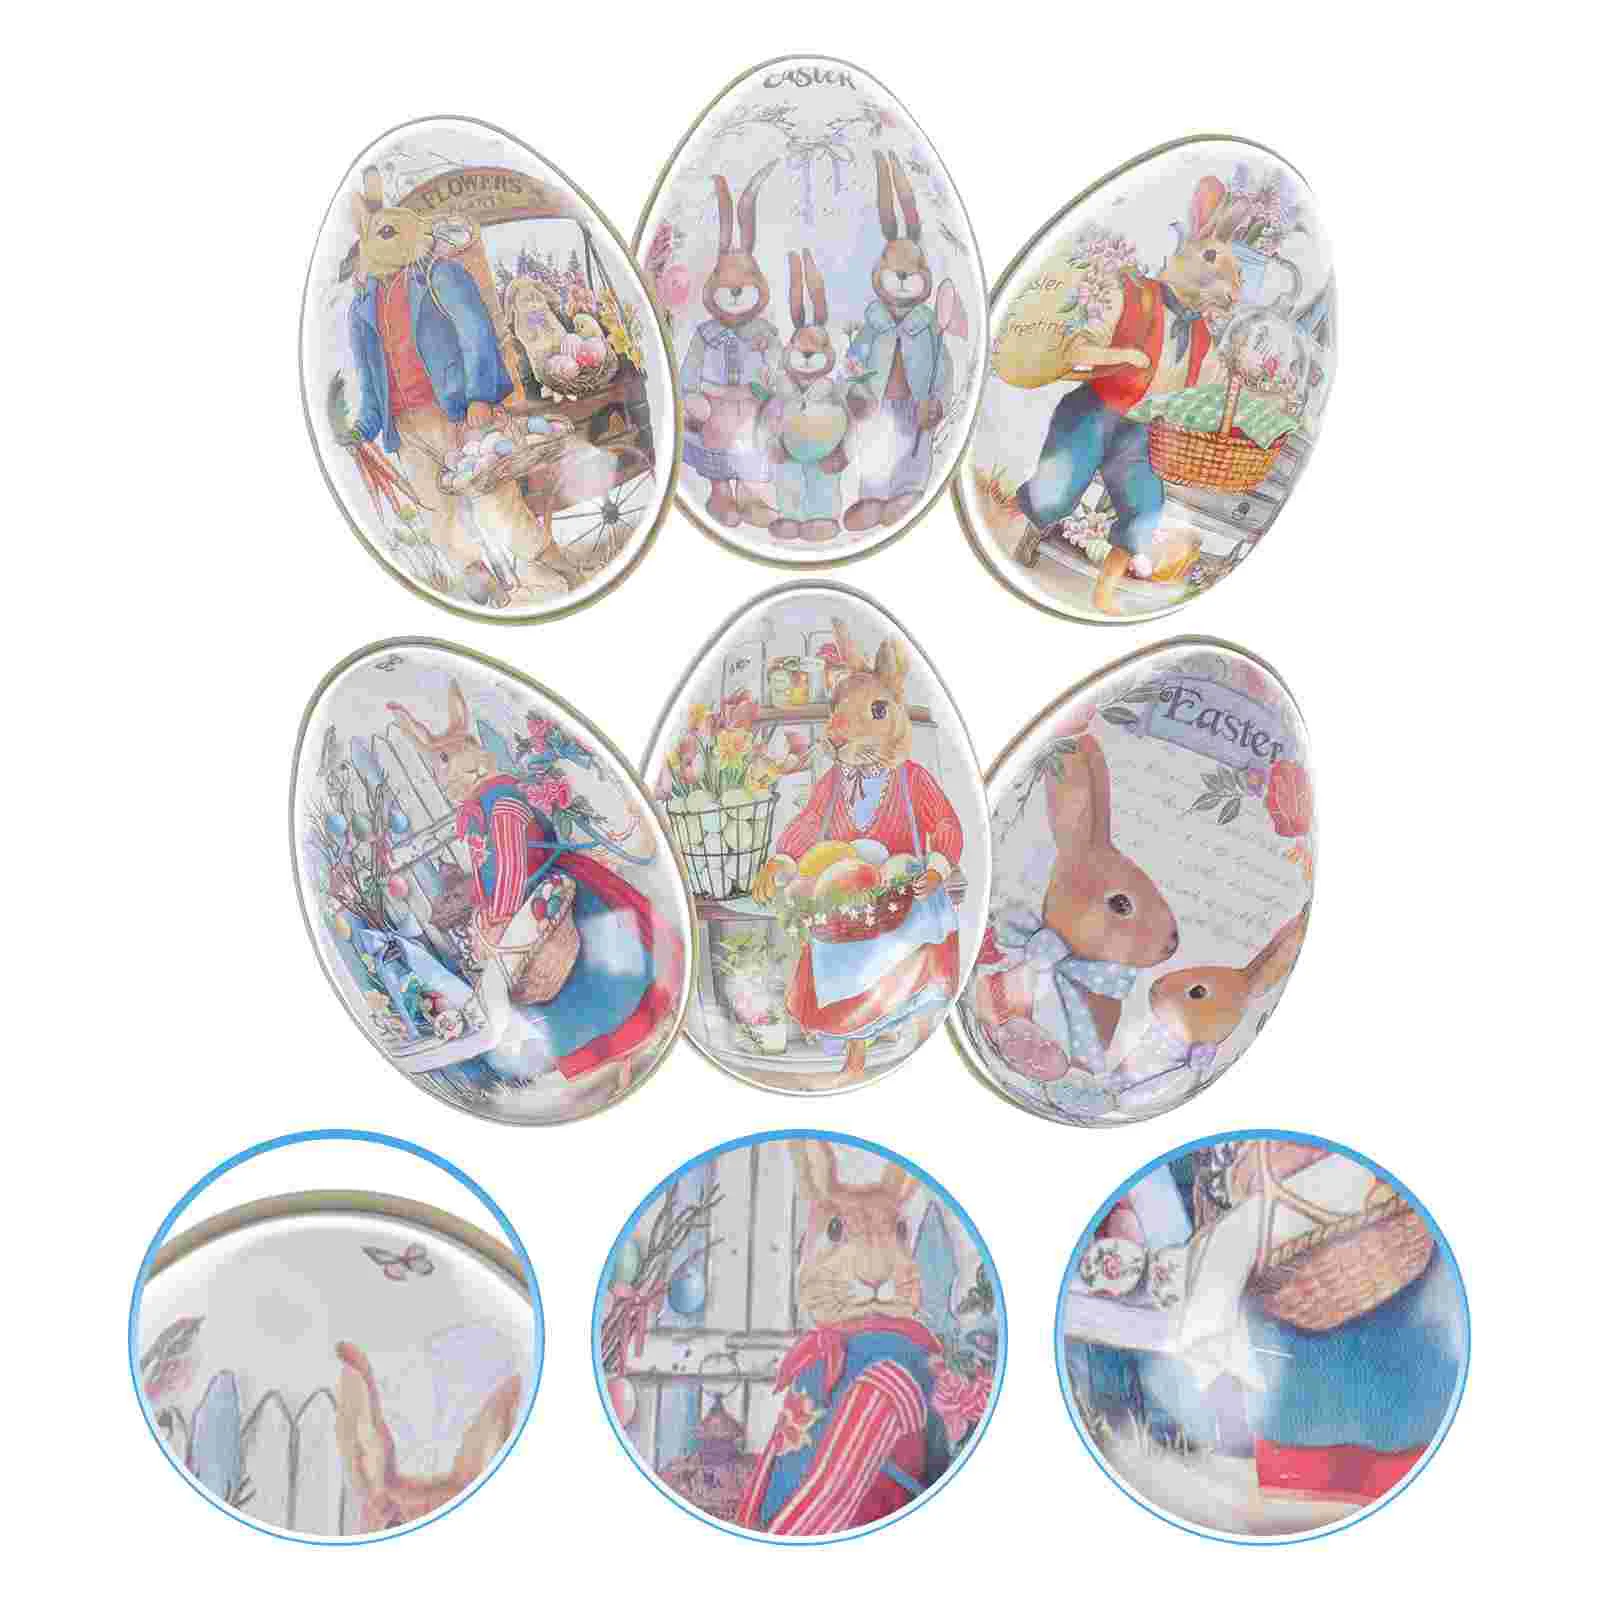 

6pcs Snack Holder Candy Party Favors Candy Box Tin Box Candy Boxes Party Favors Decor Tinplate Biscuit Case Cookies Boxes